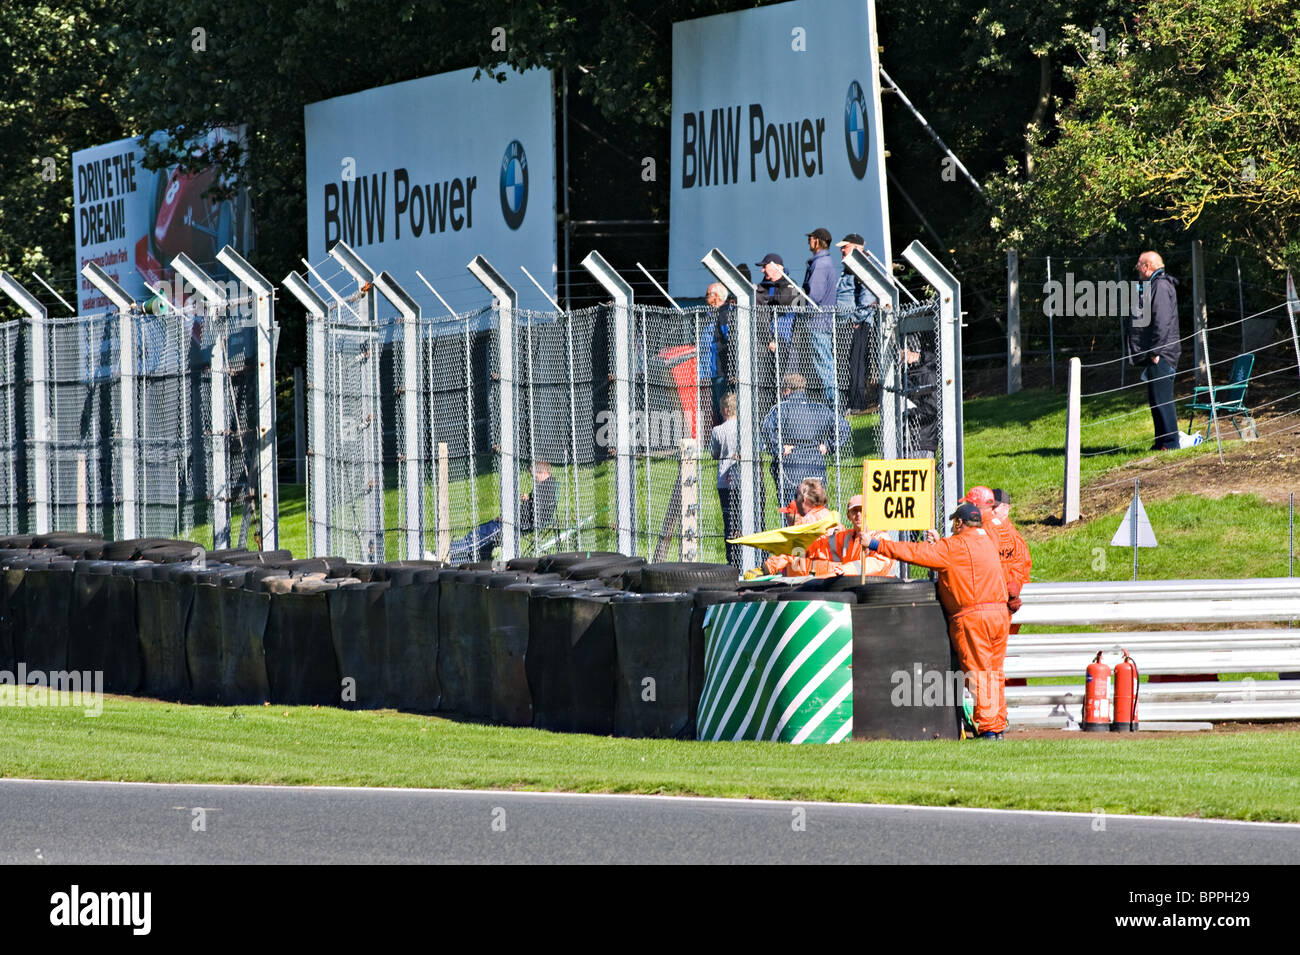 Track Marshalls Display Safety Car Board For Drivers at Oulton Park Motor Racing Circuit Cheshire England United Kingdom UK Stock Photo